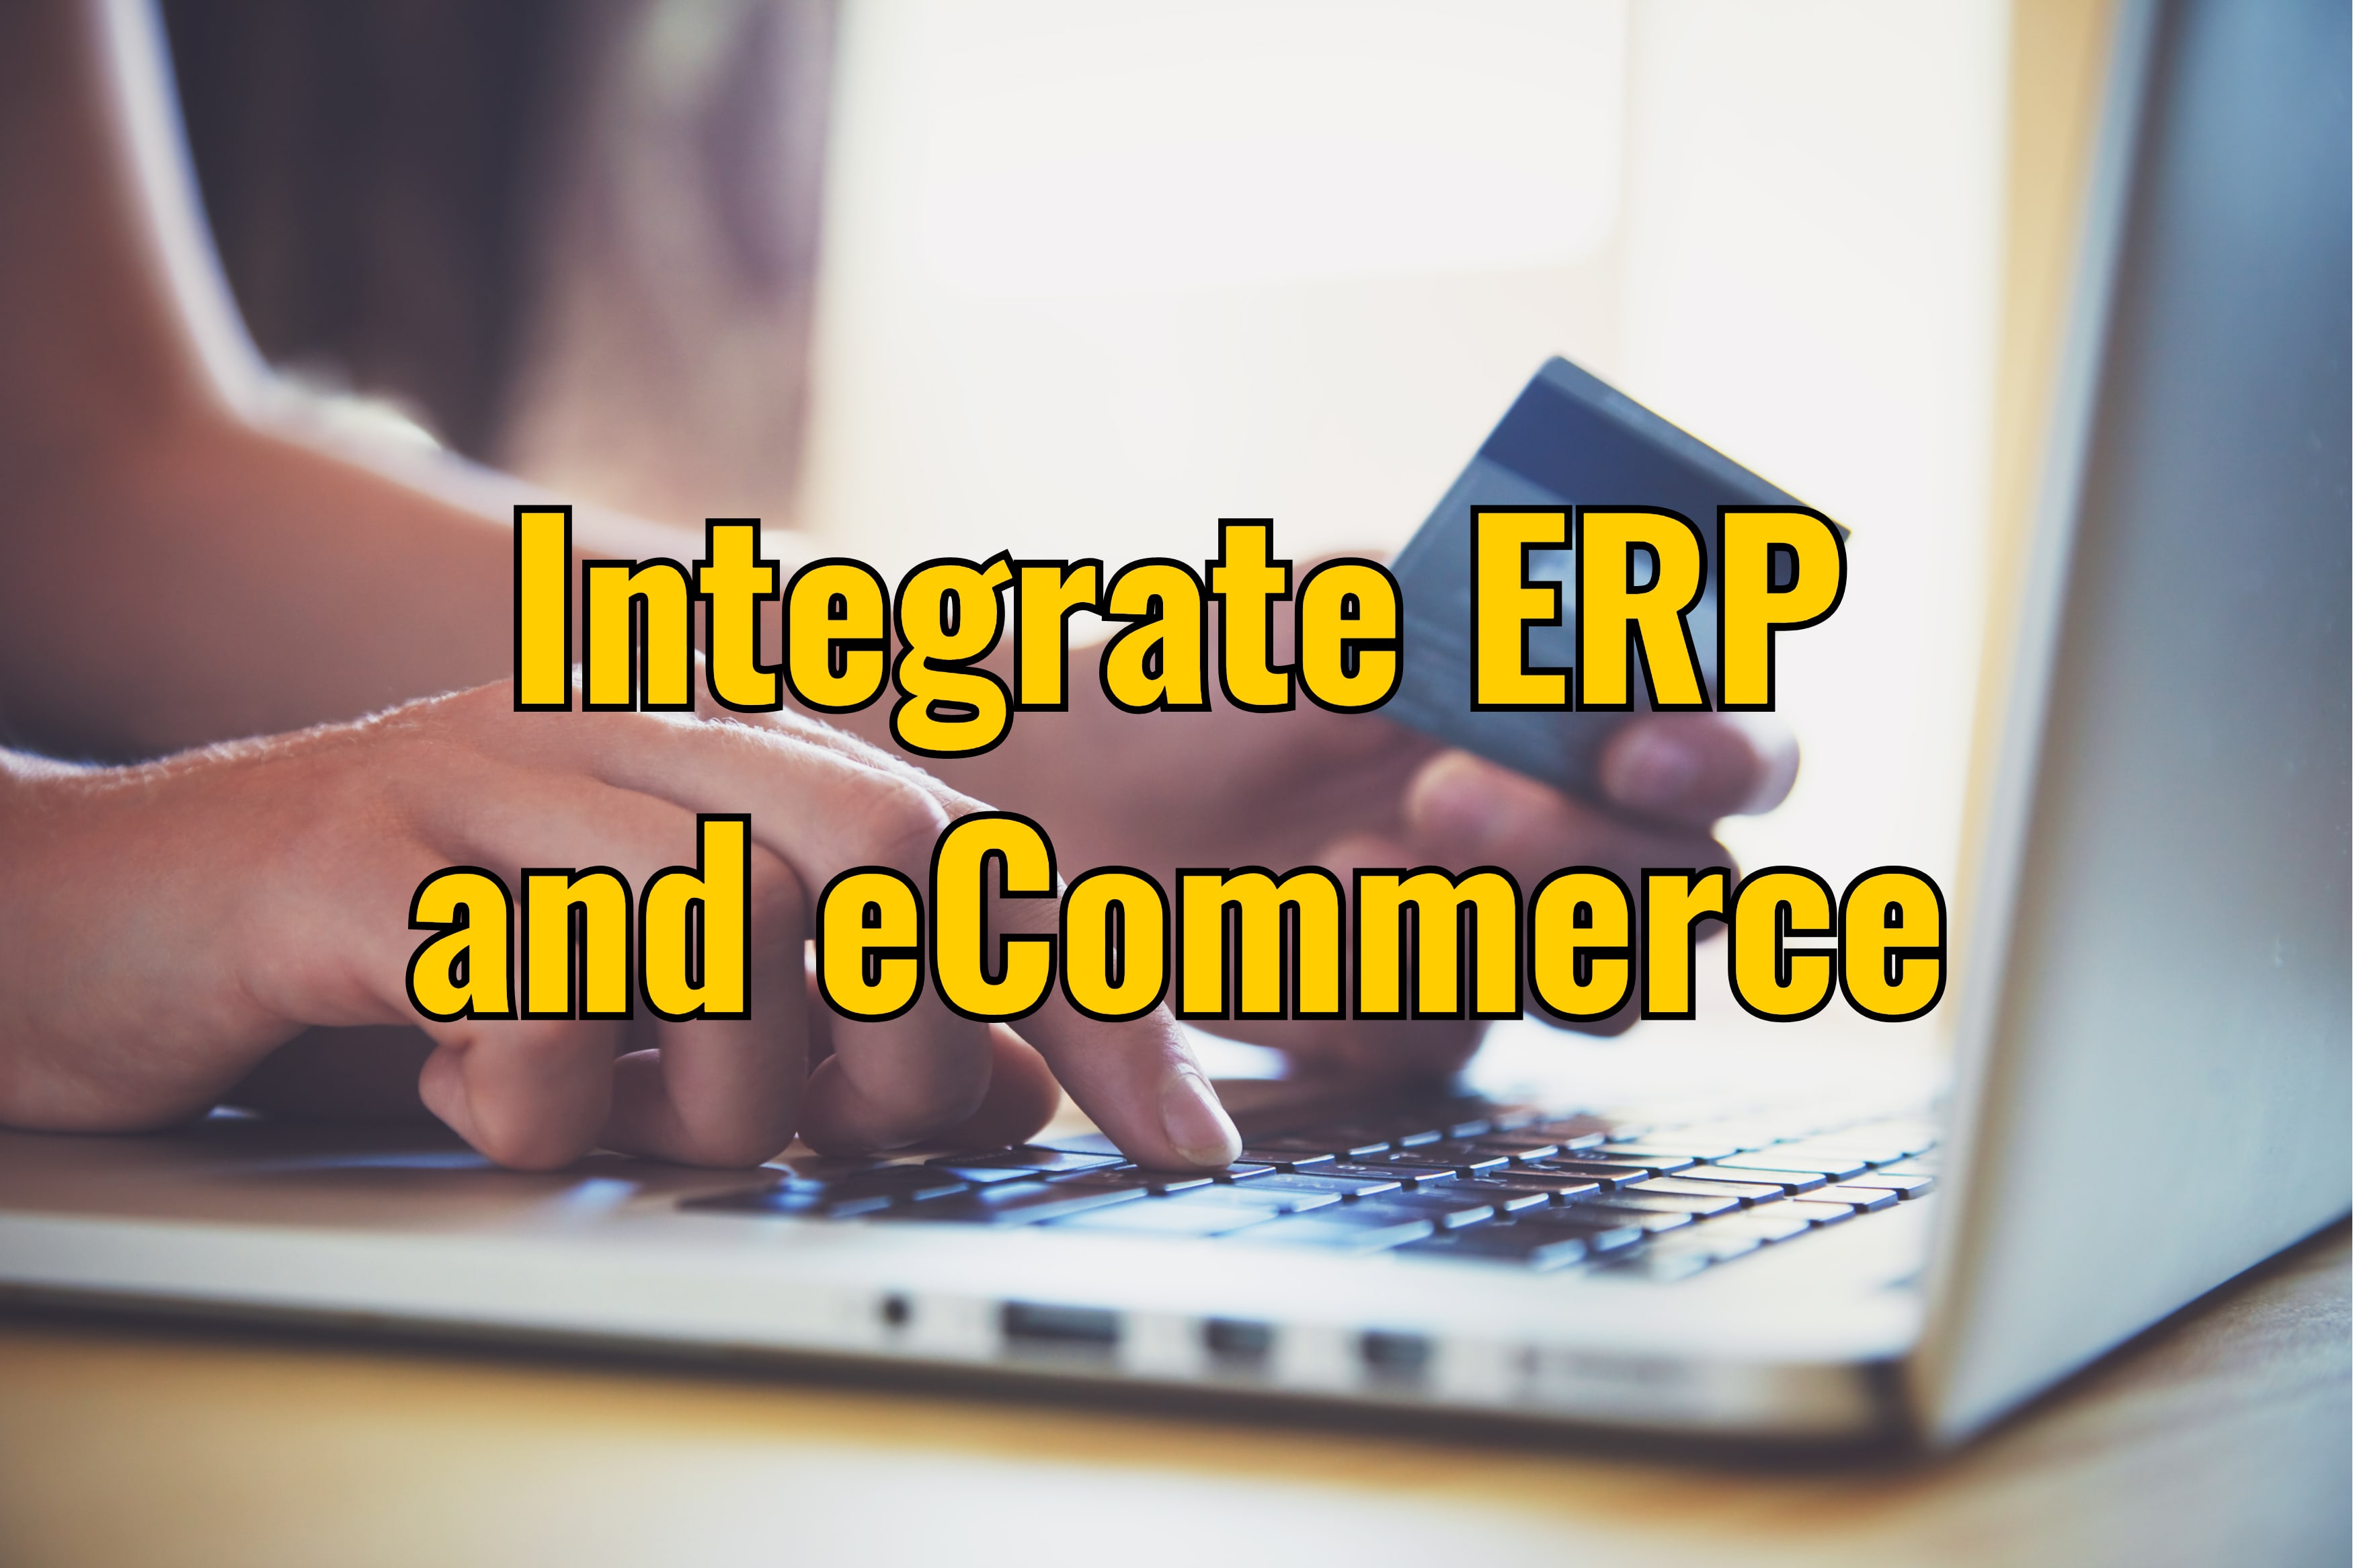 3 Reasons to Integrate ERP and eCommerce